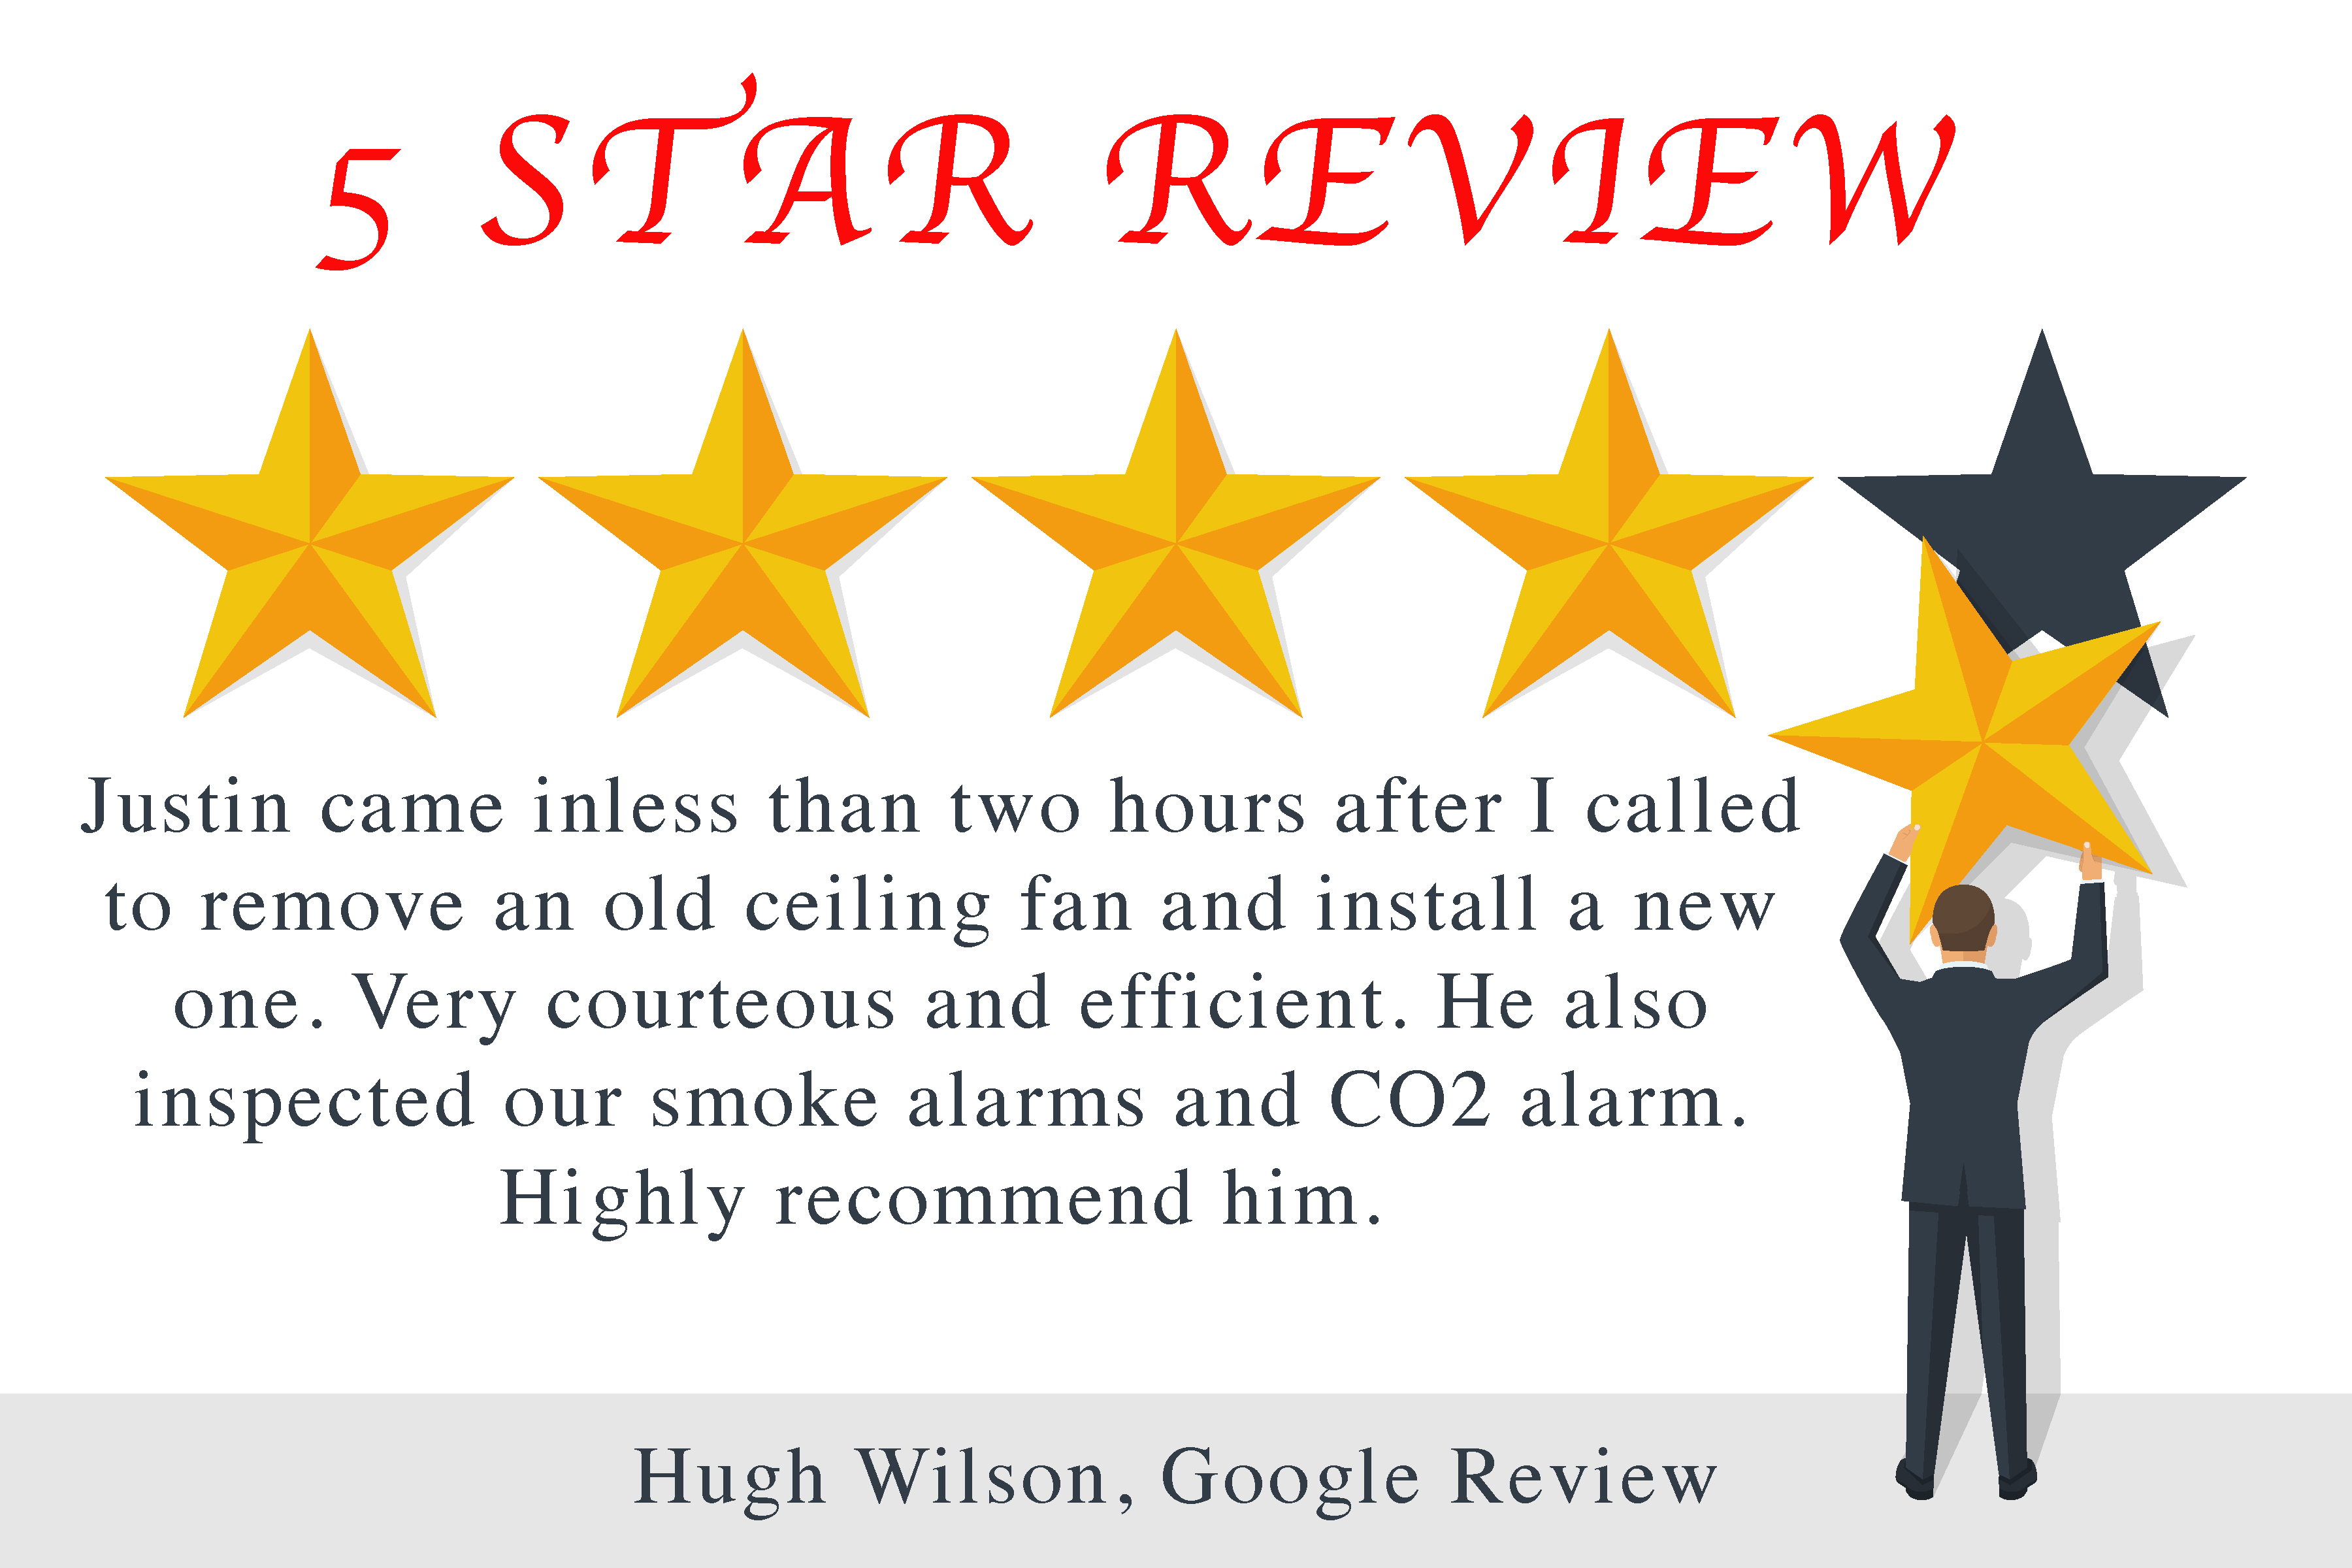 Thank you Hugh Wilson, for the 5 Star Review on Google!